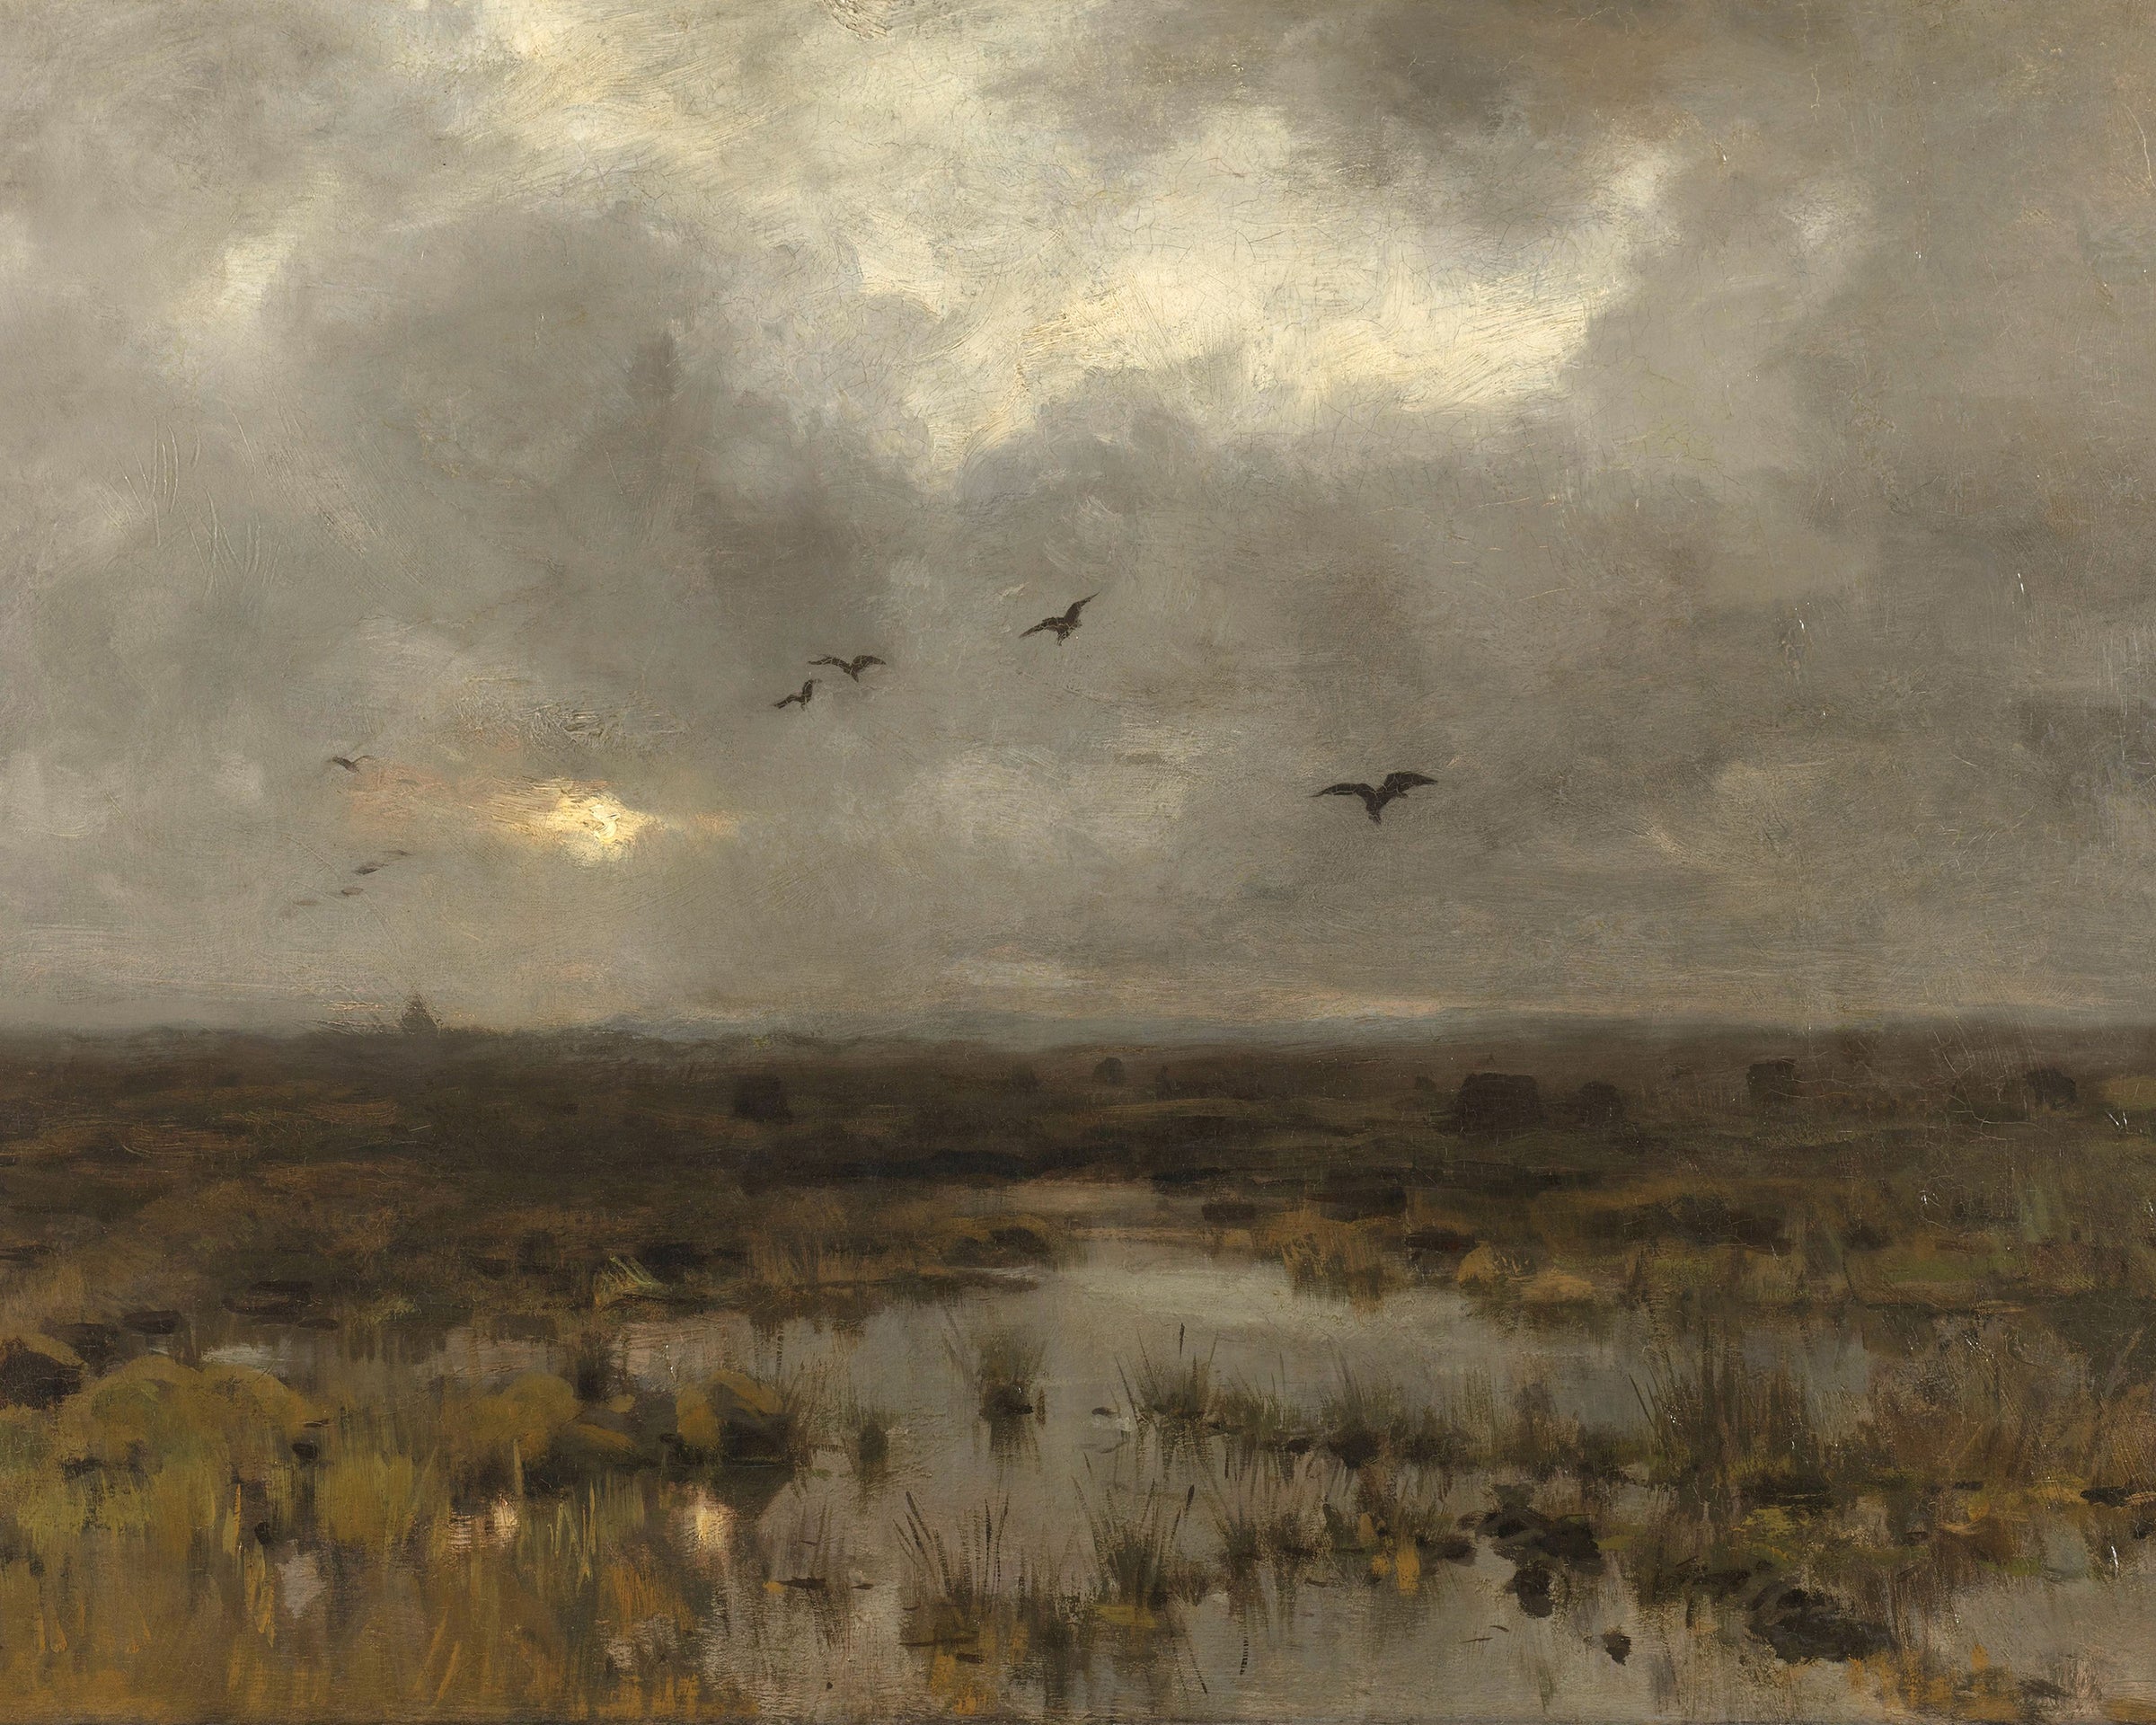 Vintage landscape painting - the marsh by Attica Press